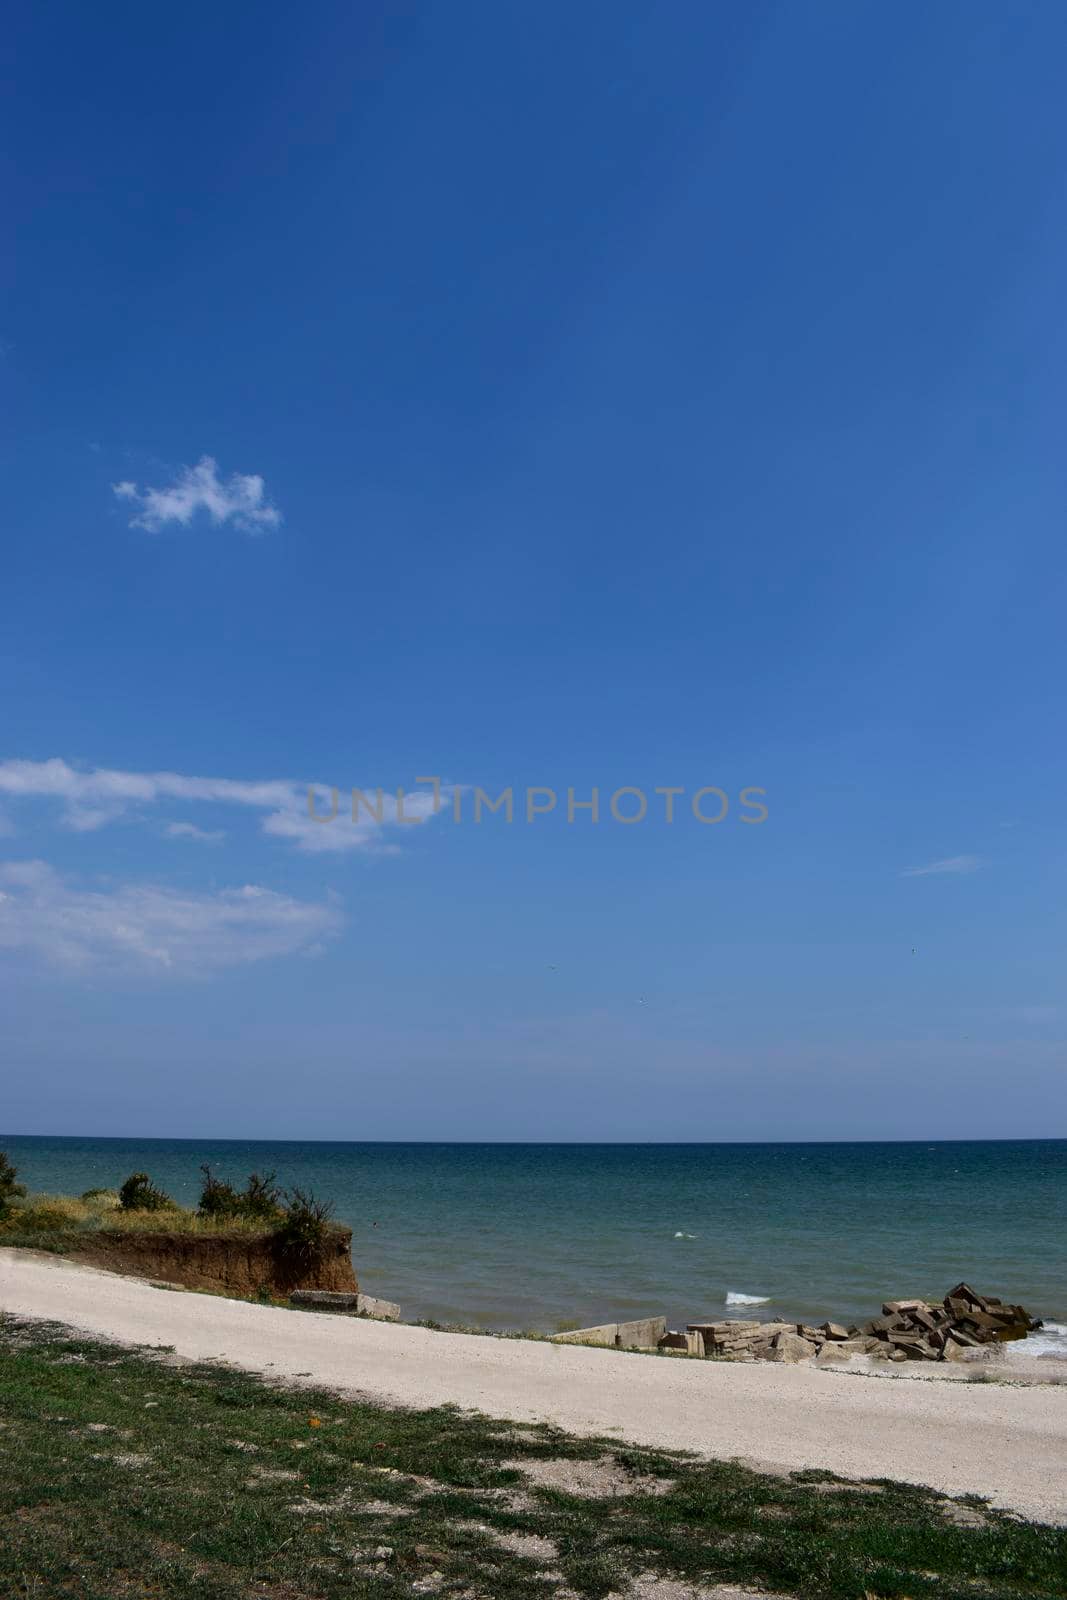 Steep cliff, seashore landscape. Cliff of clay and sea beach. Beautiful summer landscapes with clay cliffs near blue sea.